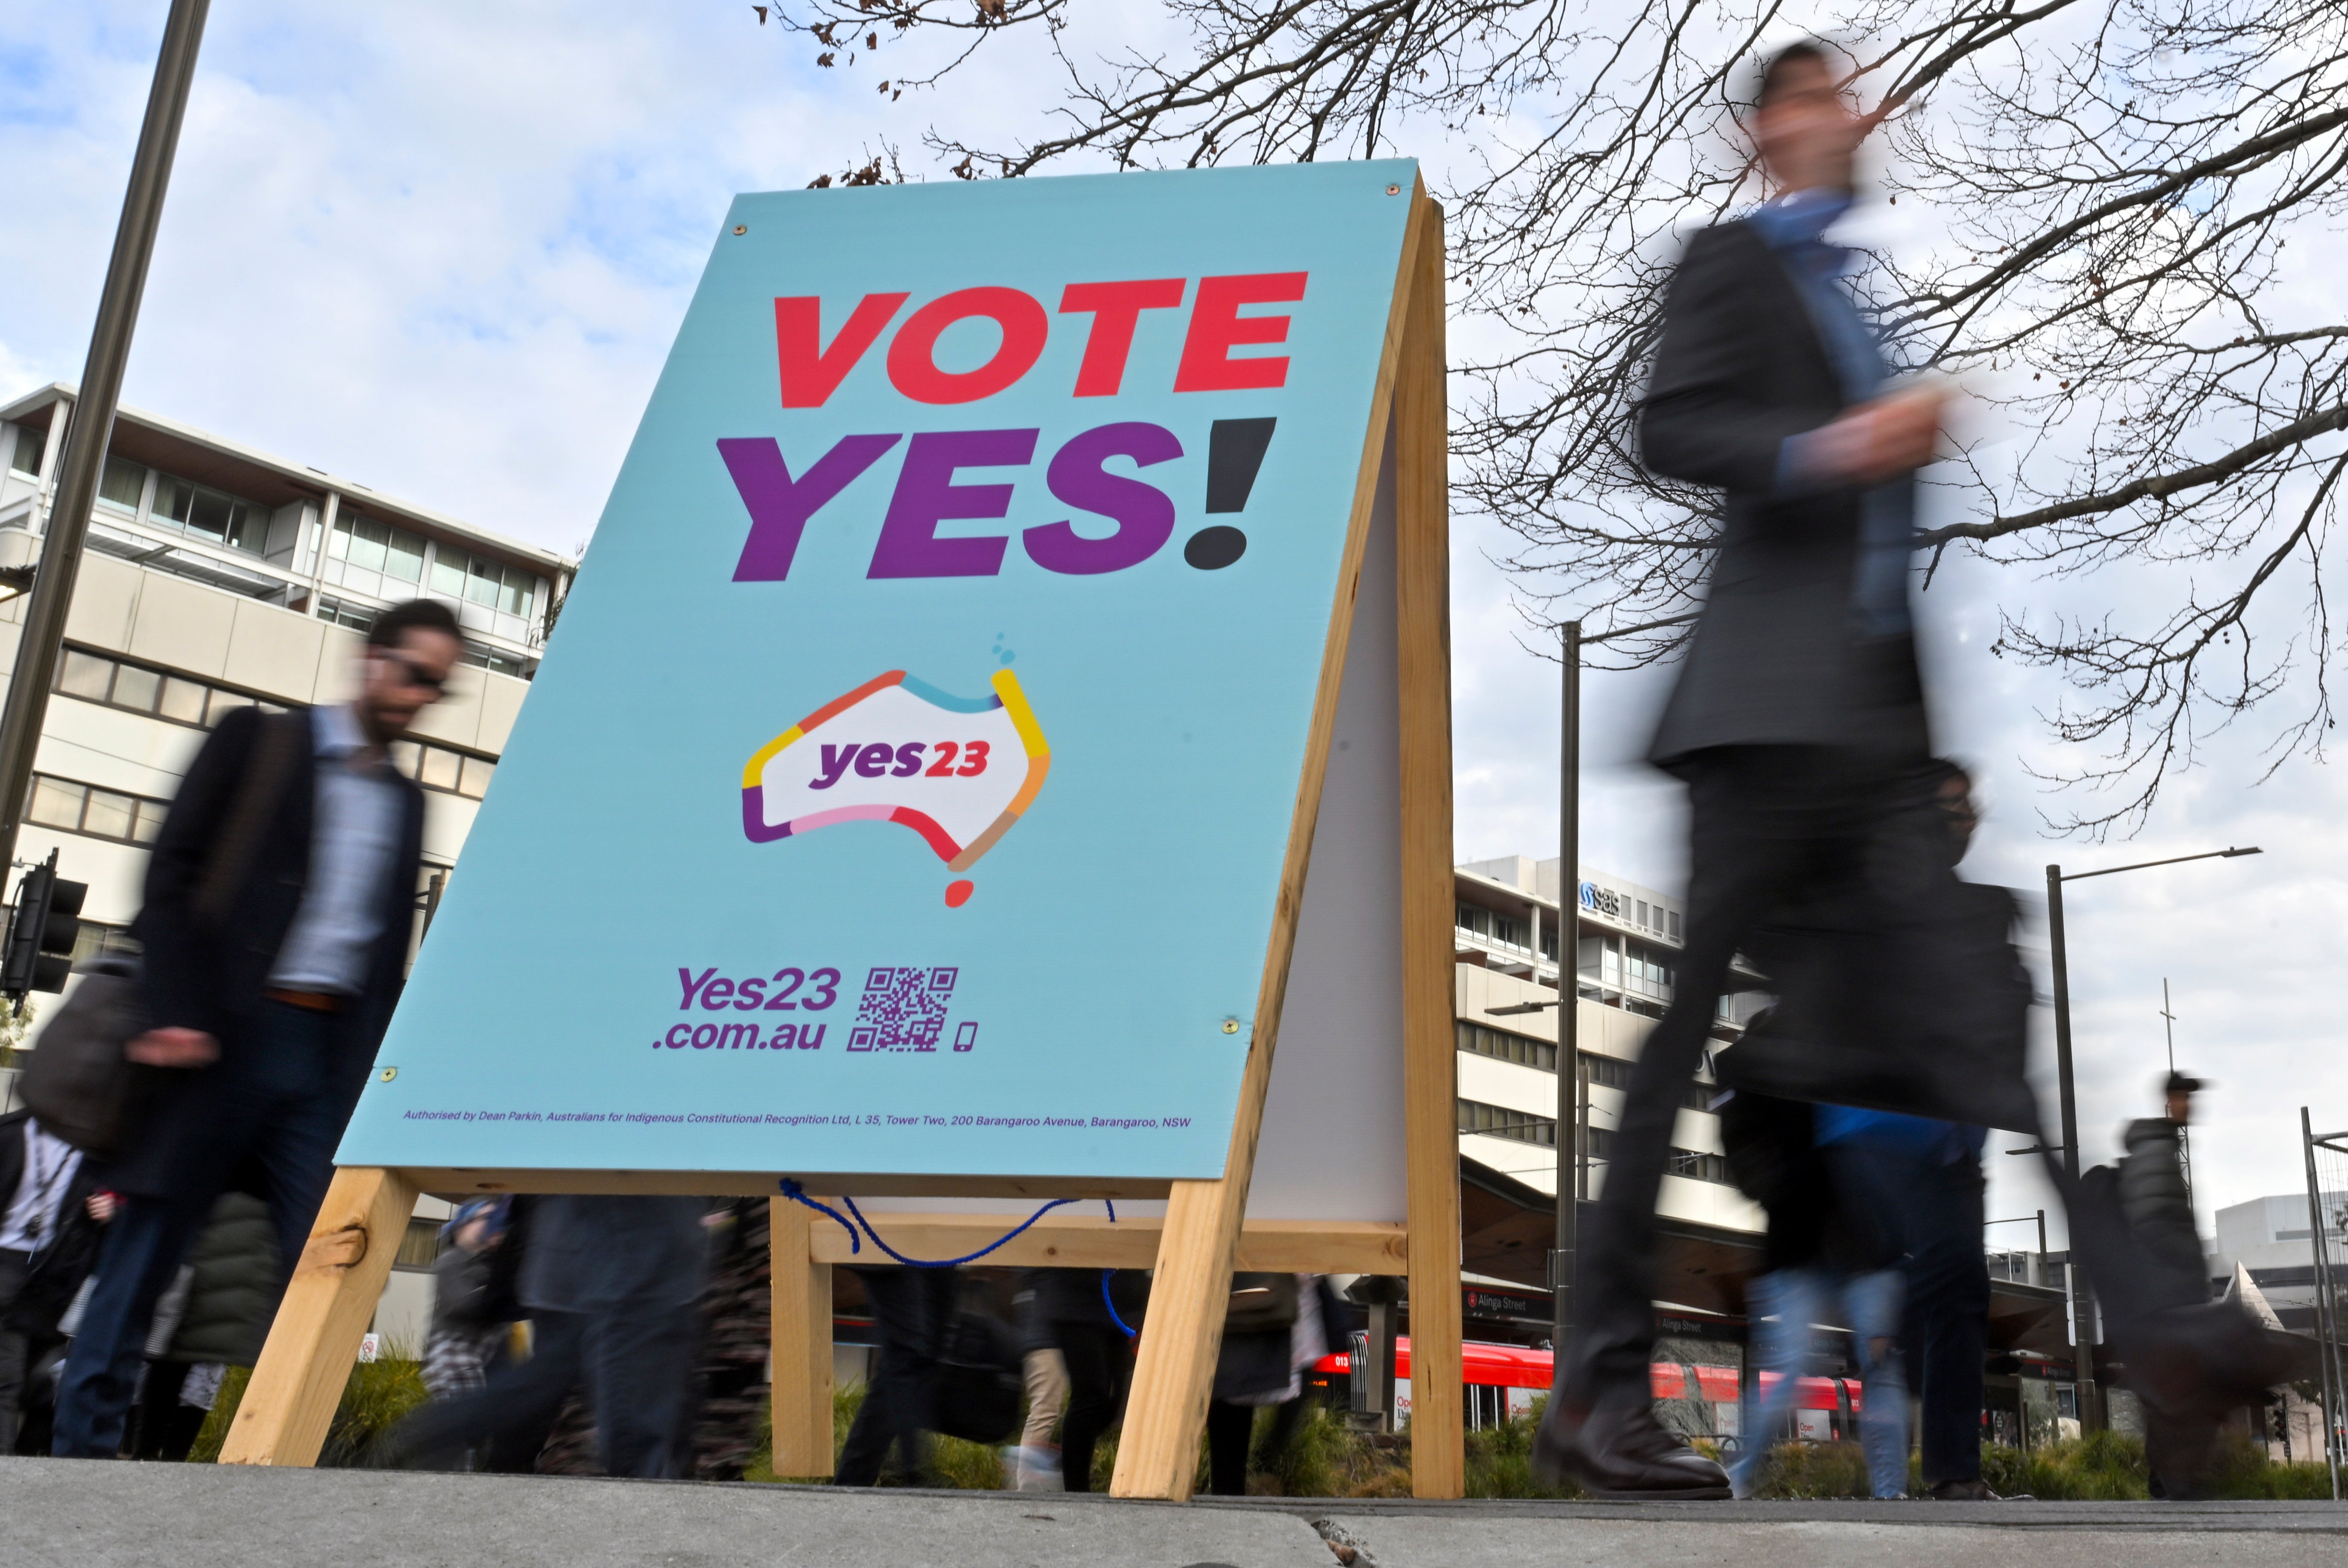 Commuters walk past a vote ‘yes’ stand for the upcoming Voice referendum at the Civic Bus Interchange in Canberra on 30 August